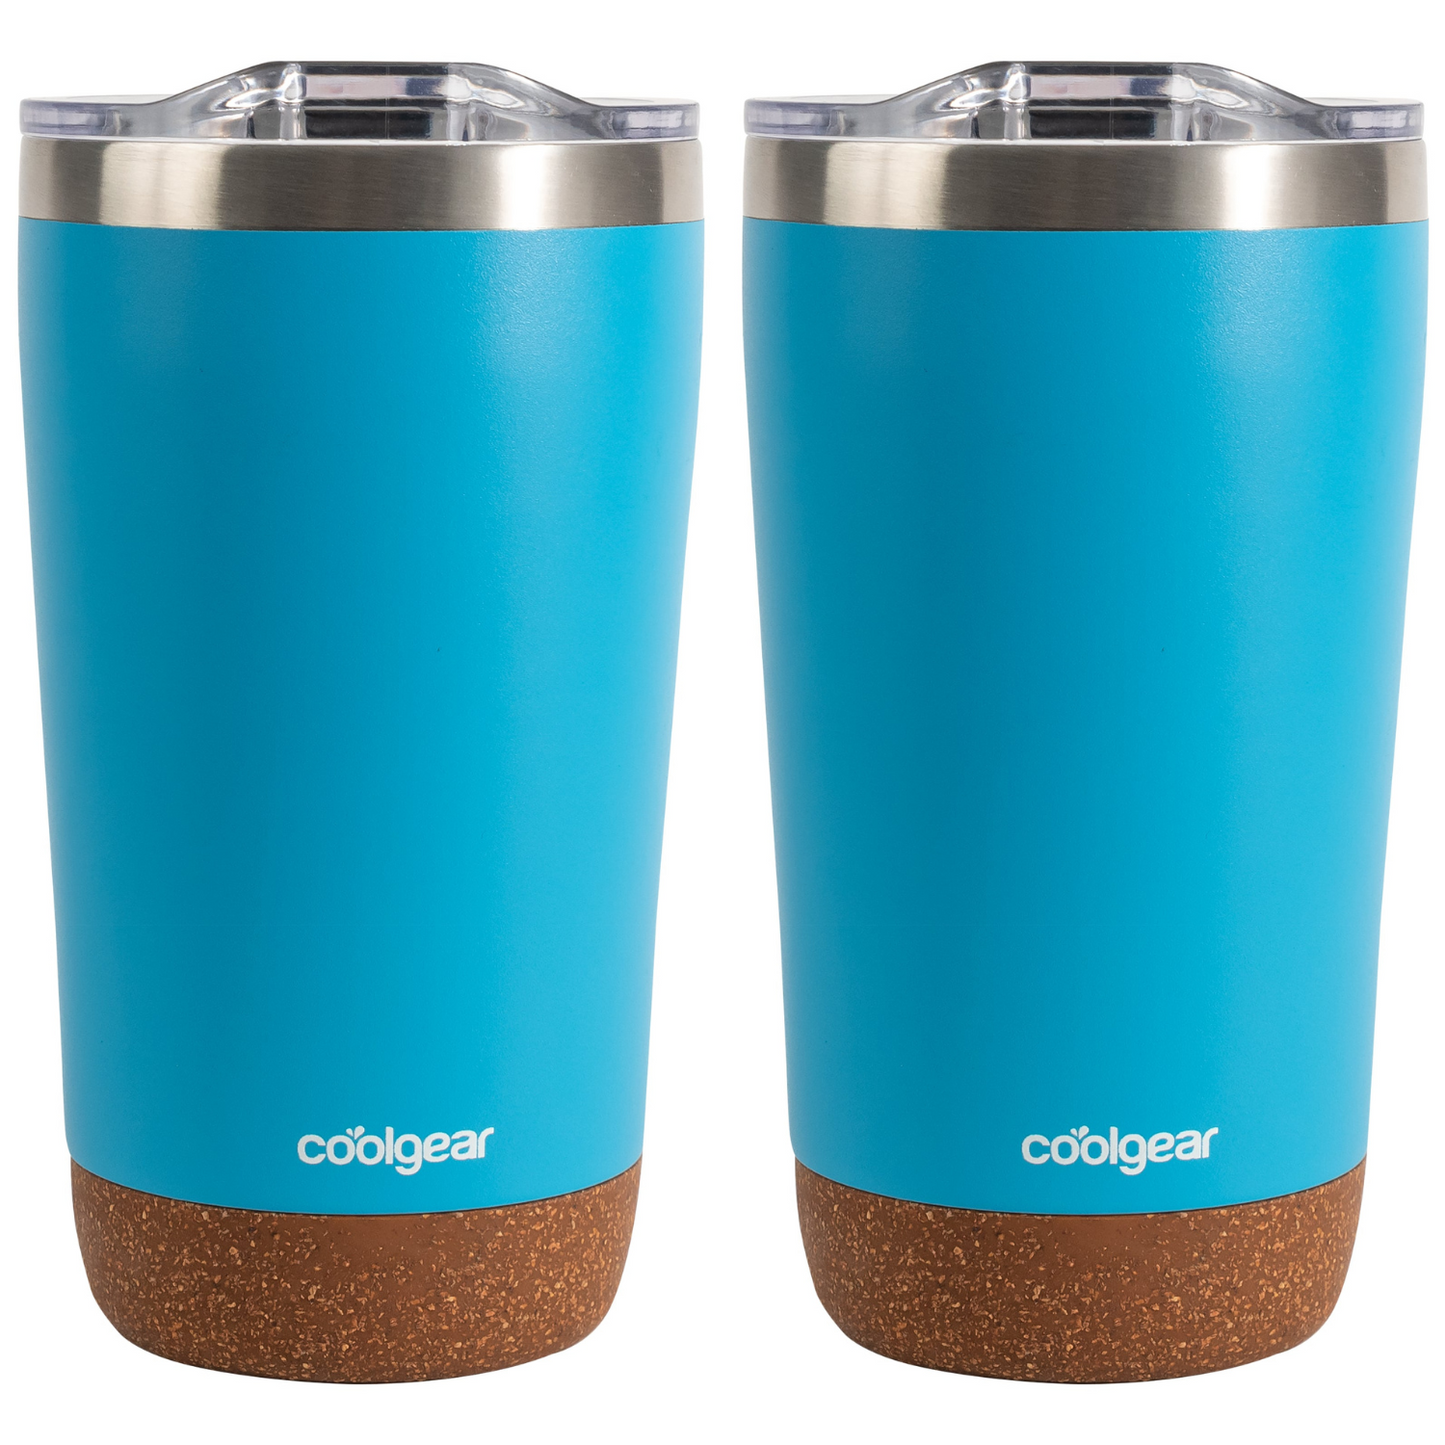 Cool Gear 2-Pack American Designed, Stainless Steel, Dishwasher Safe, Copper Lined BPA Free Lid Tumbler, 16 oz